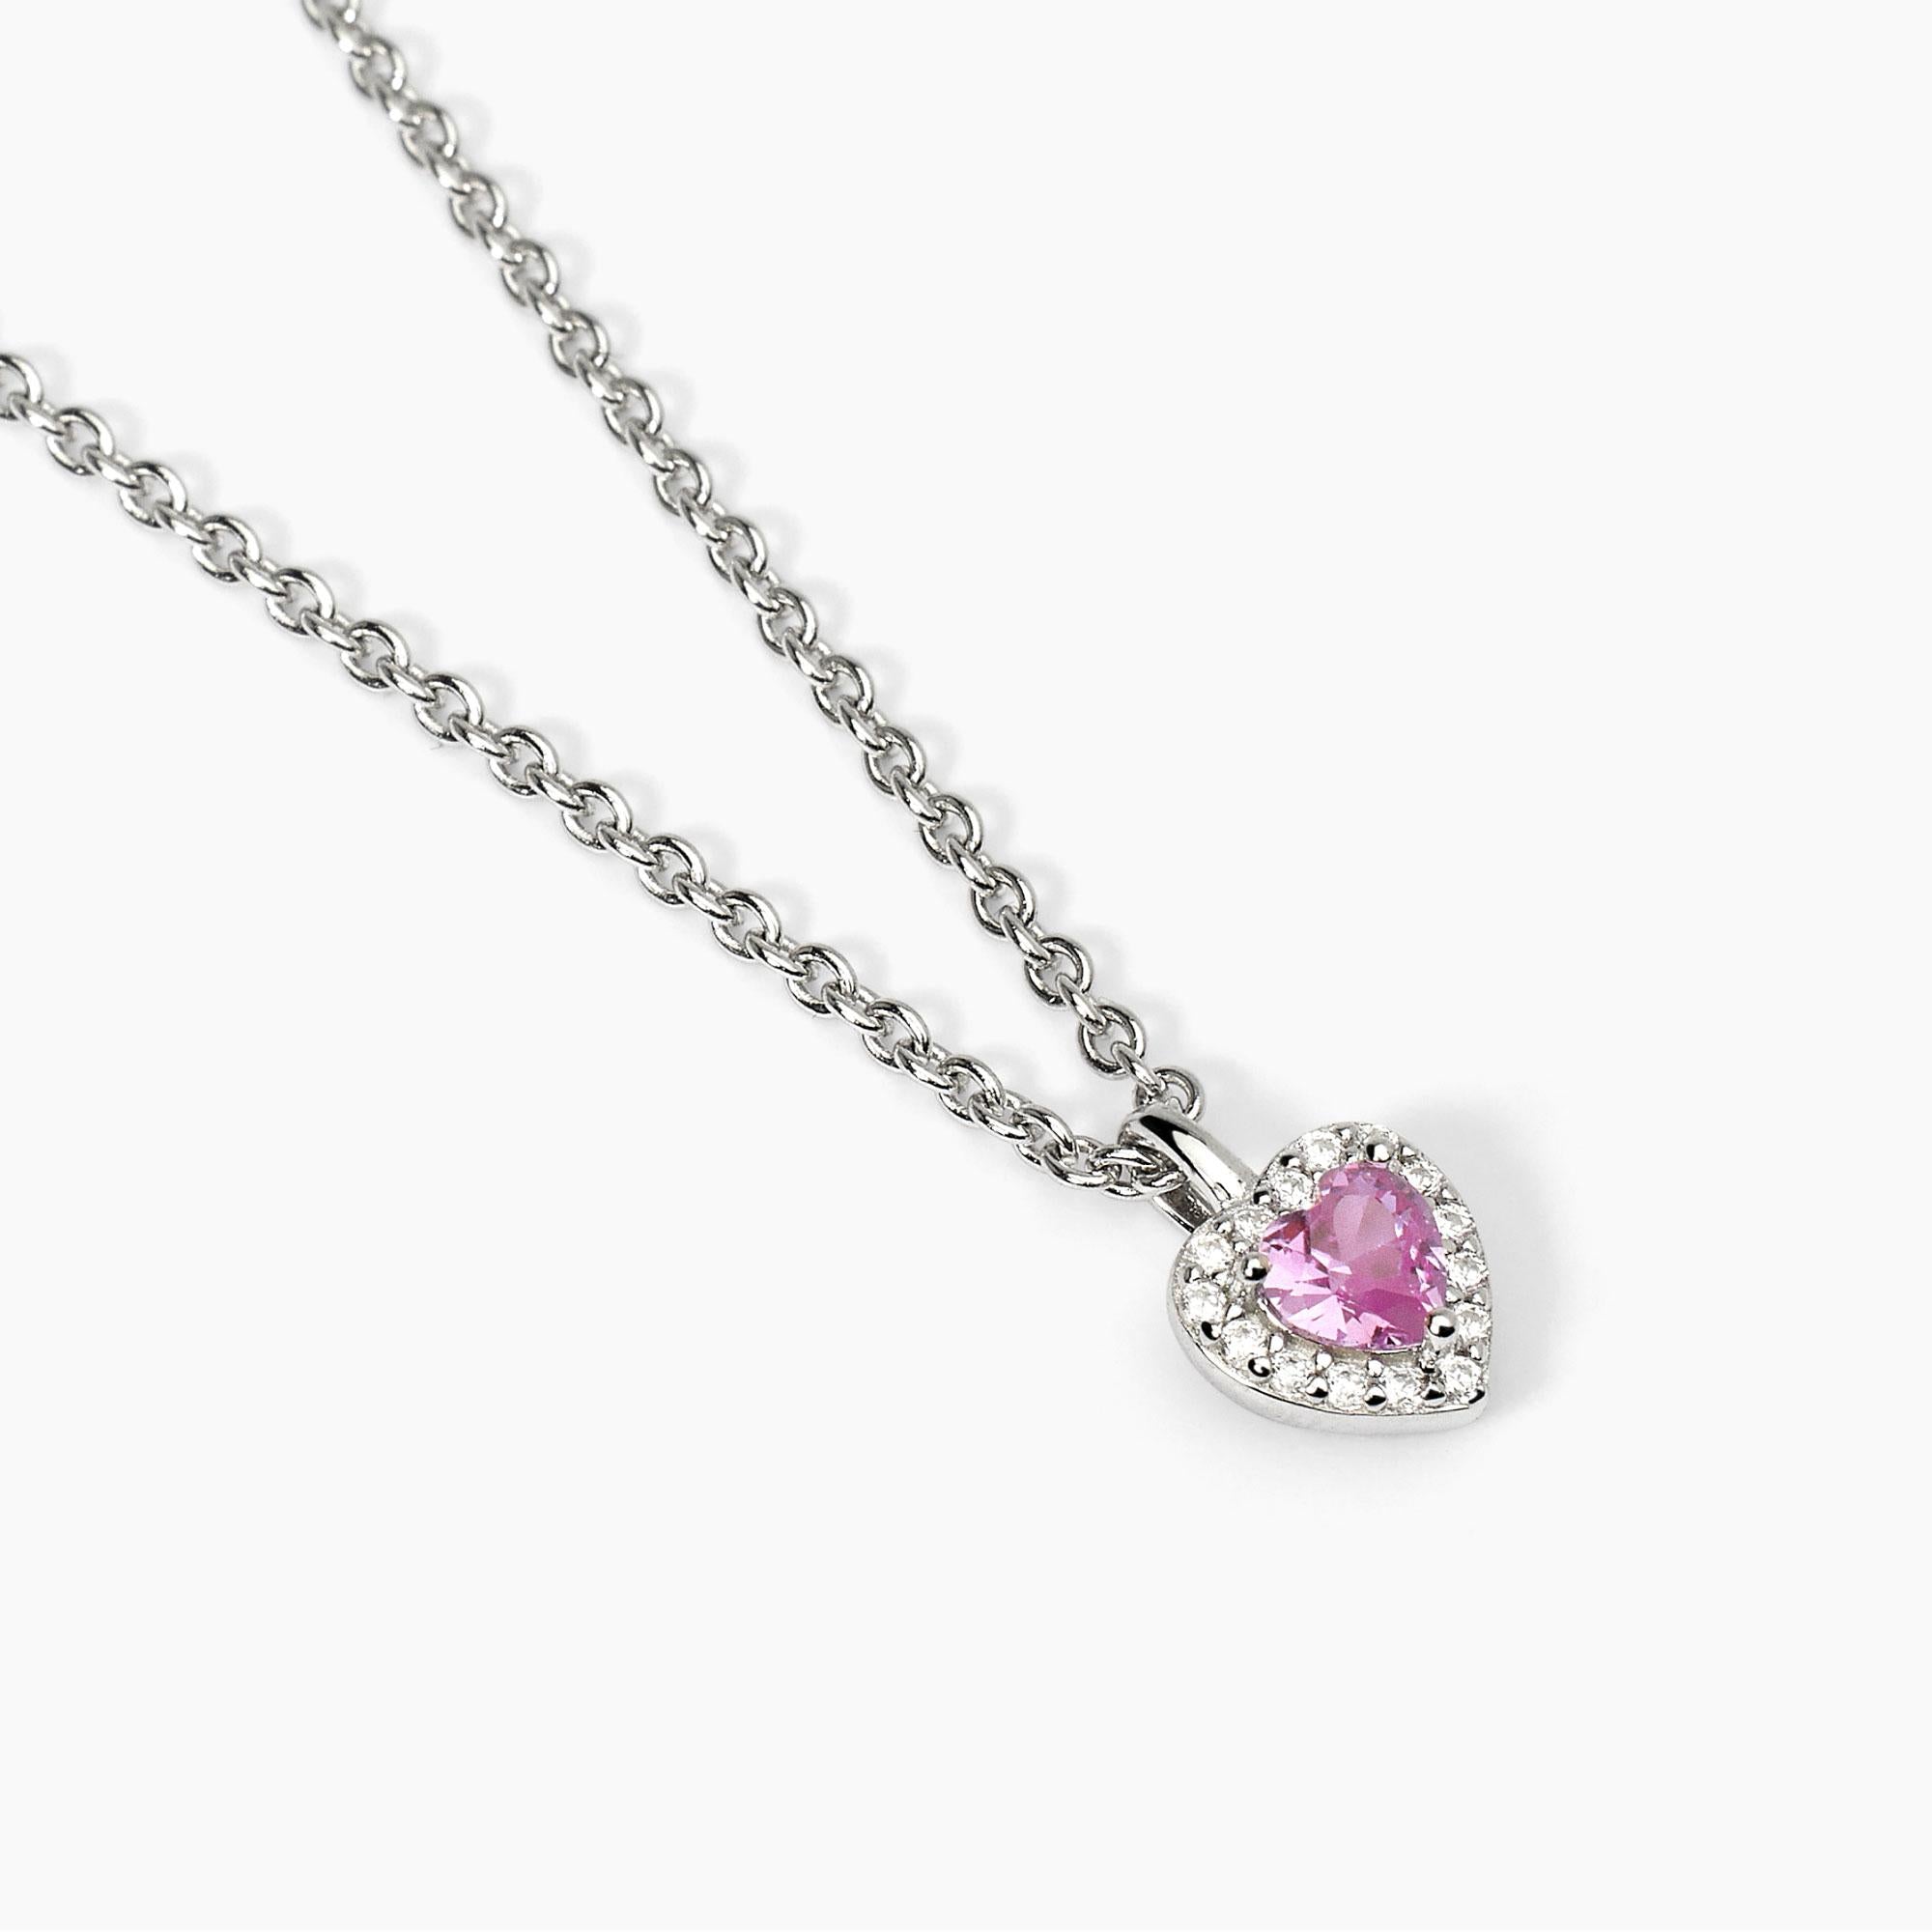 Mabina Woman - Silver necklace with heart-shaped synthetic tourmaline LOVE AFFAIR - 553668